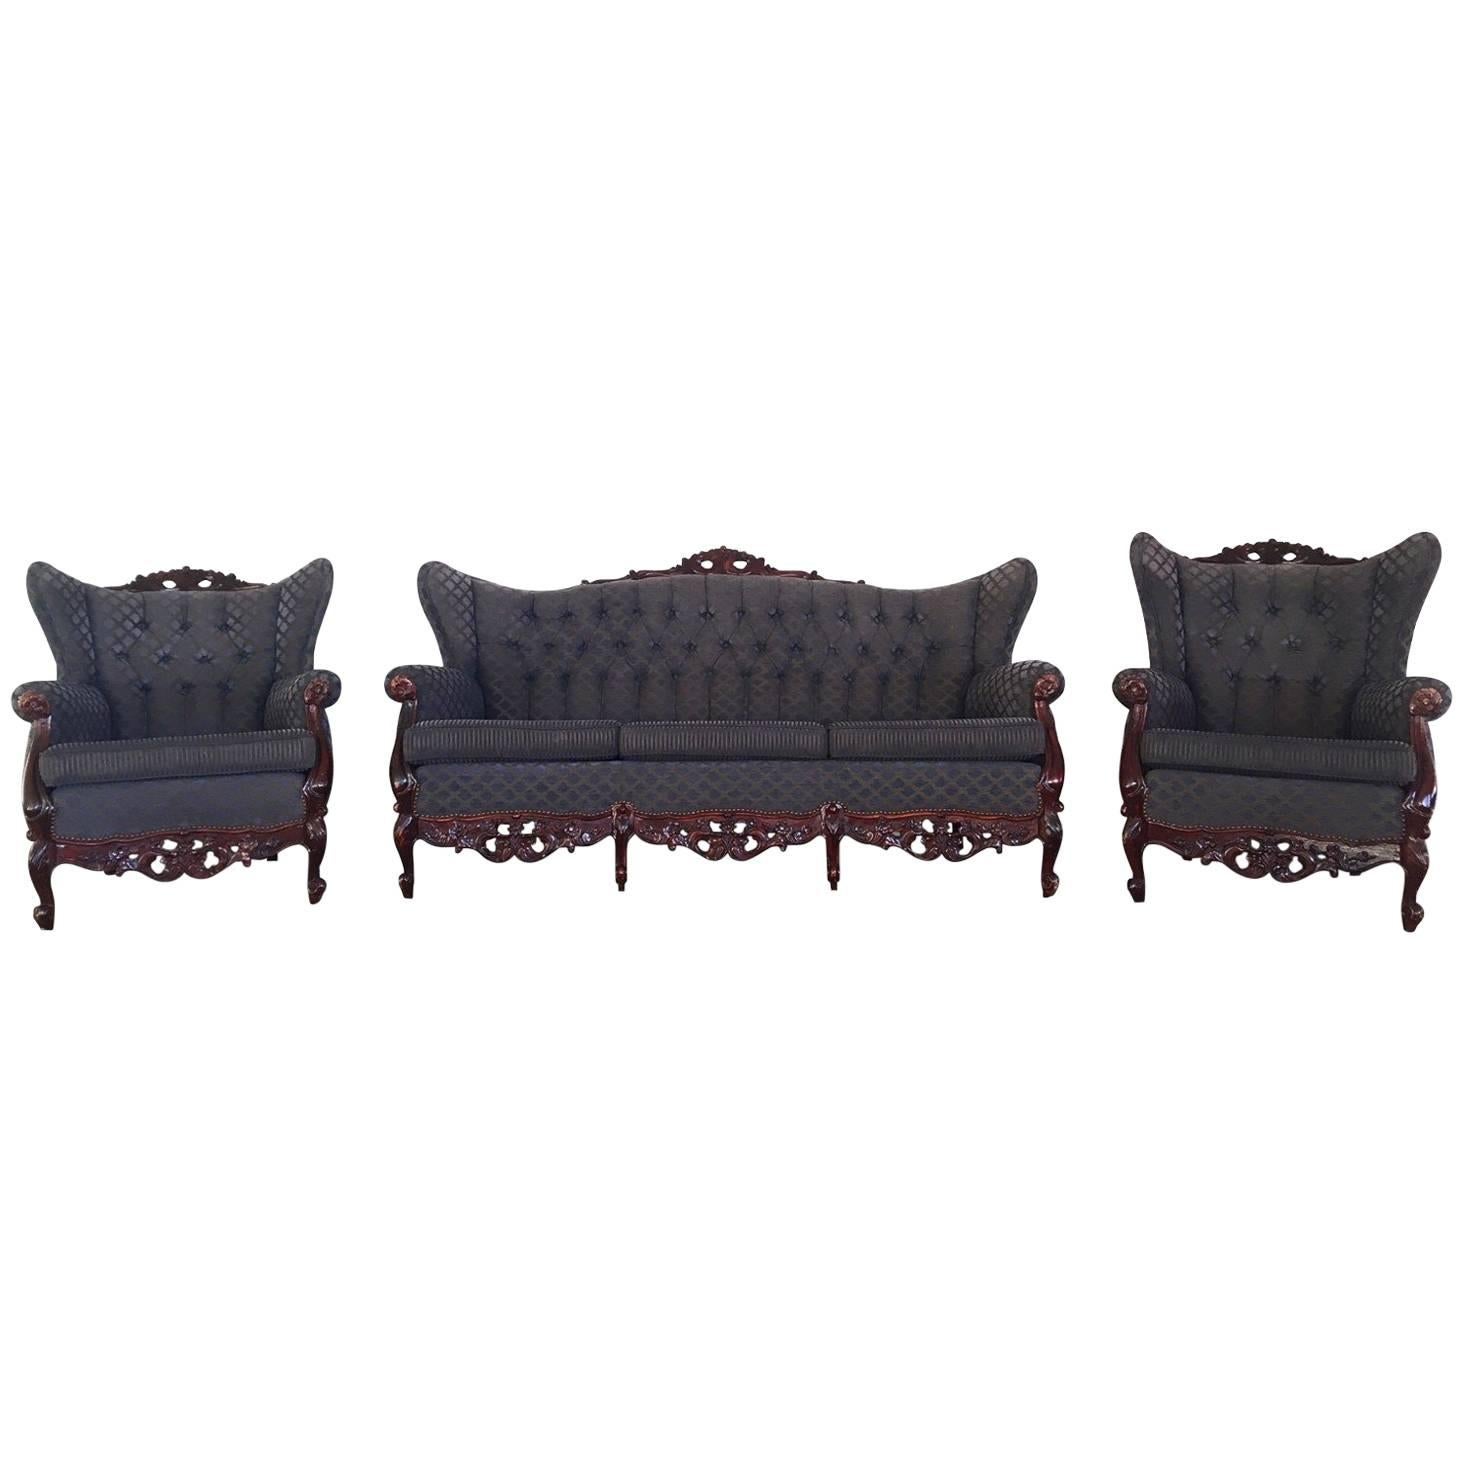 20th Century French Sofa Set, Rococo Baroque Style with Two Wingback Chairs